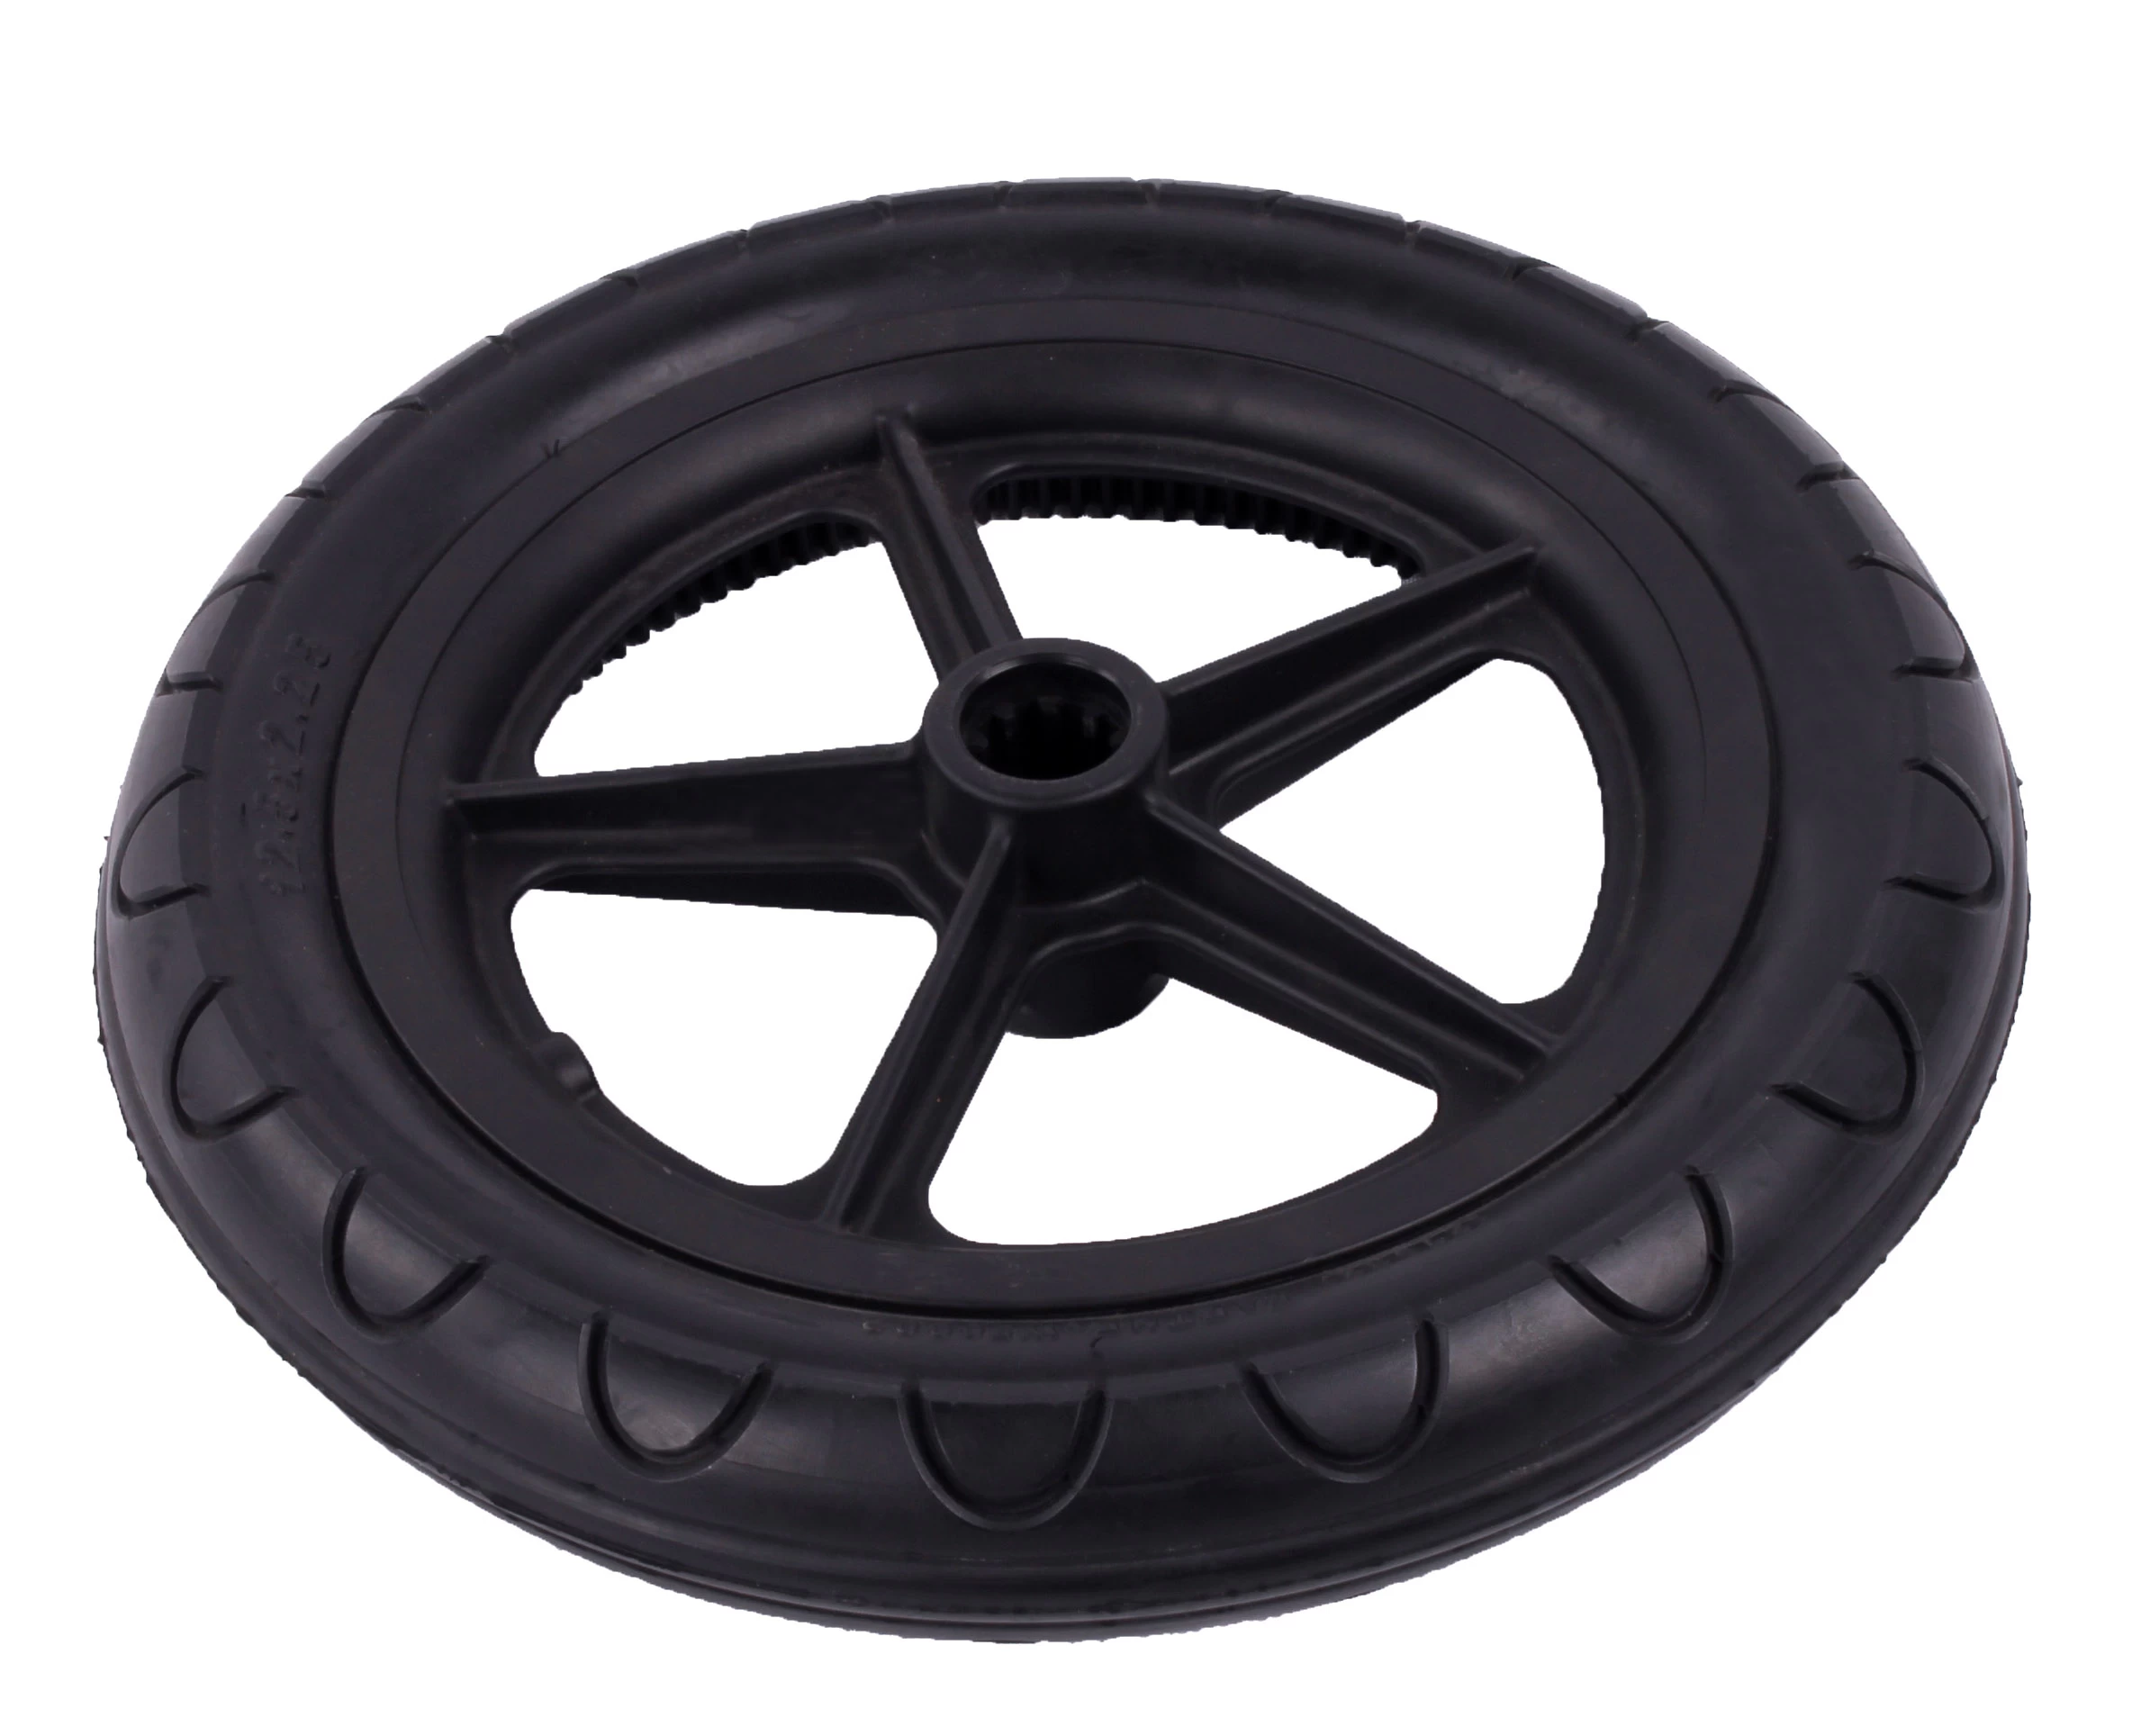 Polyurethane OEM inflation free baby carriage solid tires